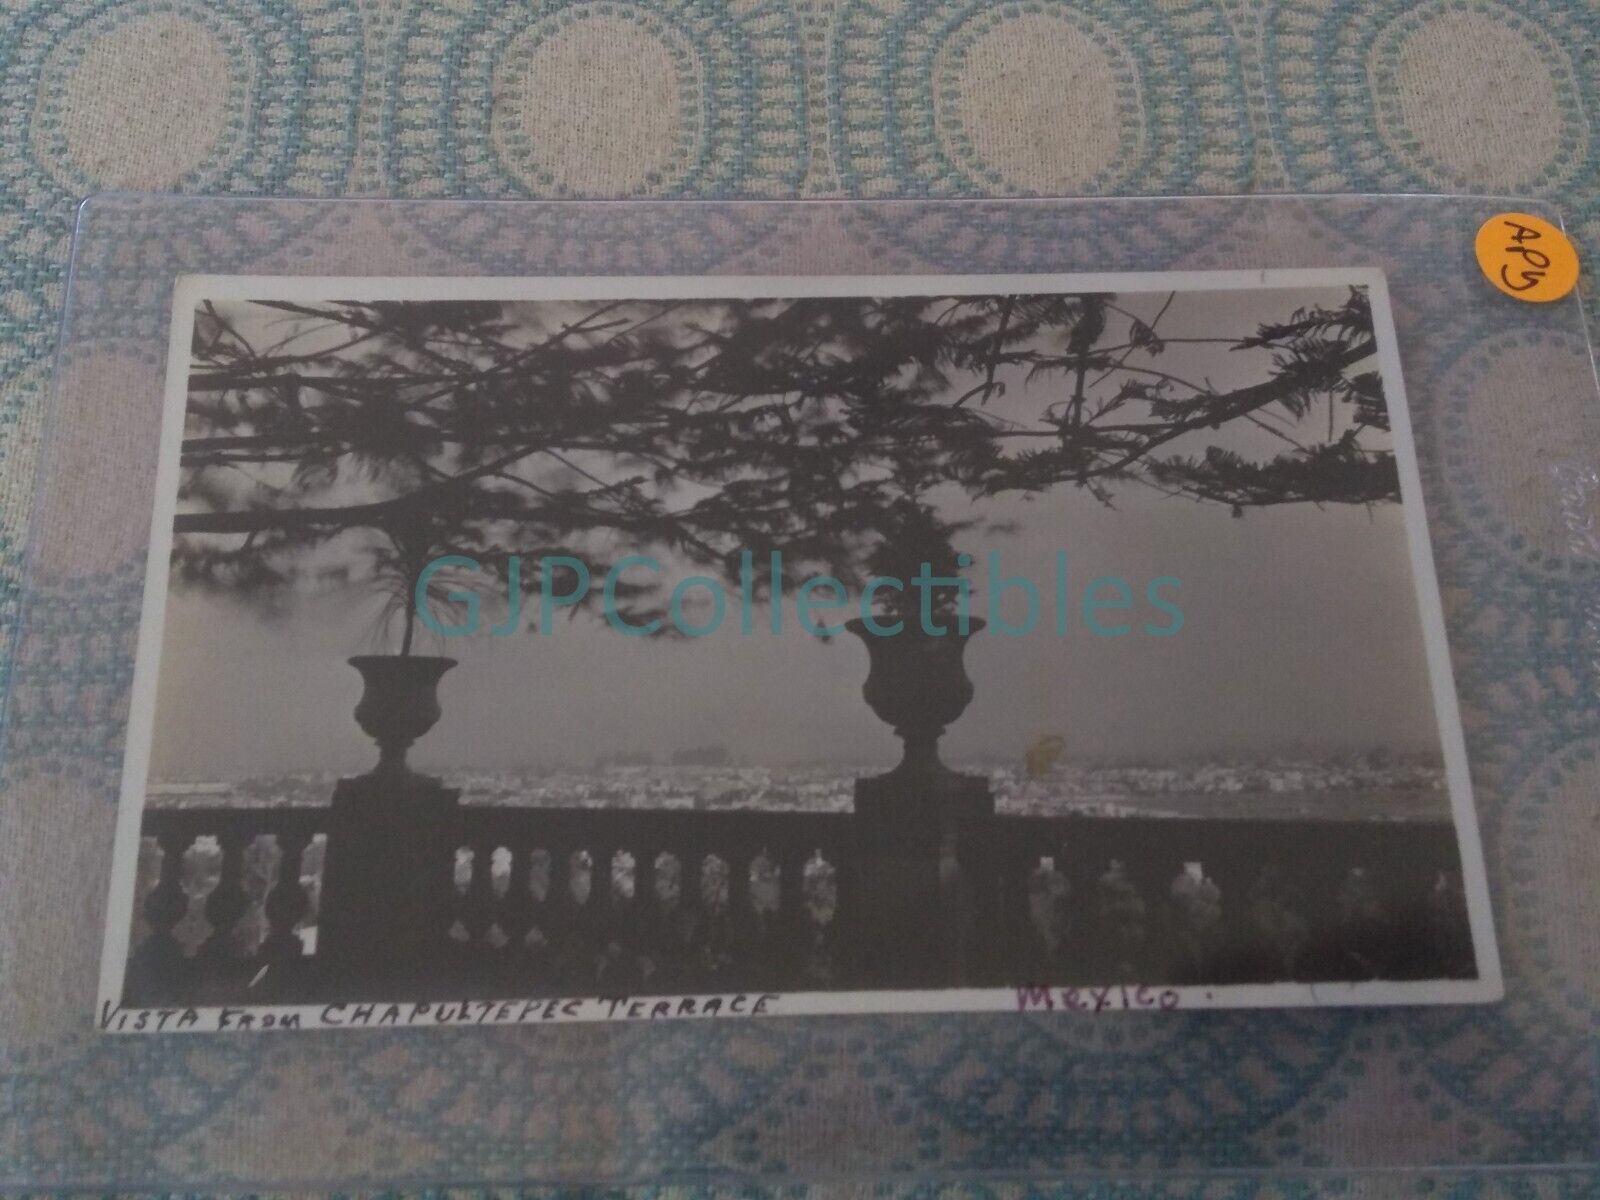 APY VINTAGE PHOTOGRAPH Spencer Lionel Adams VISTA FROM CHAPULTEPEC TERRACE